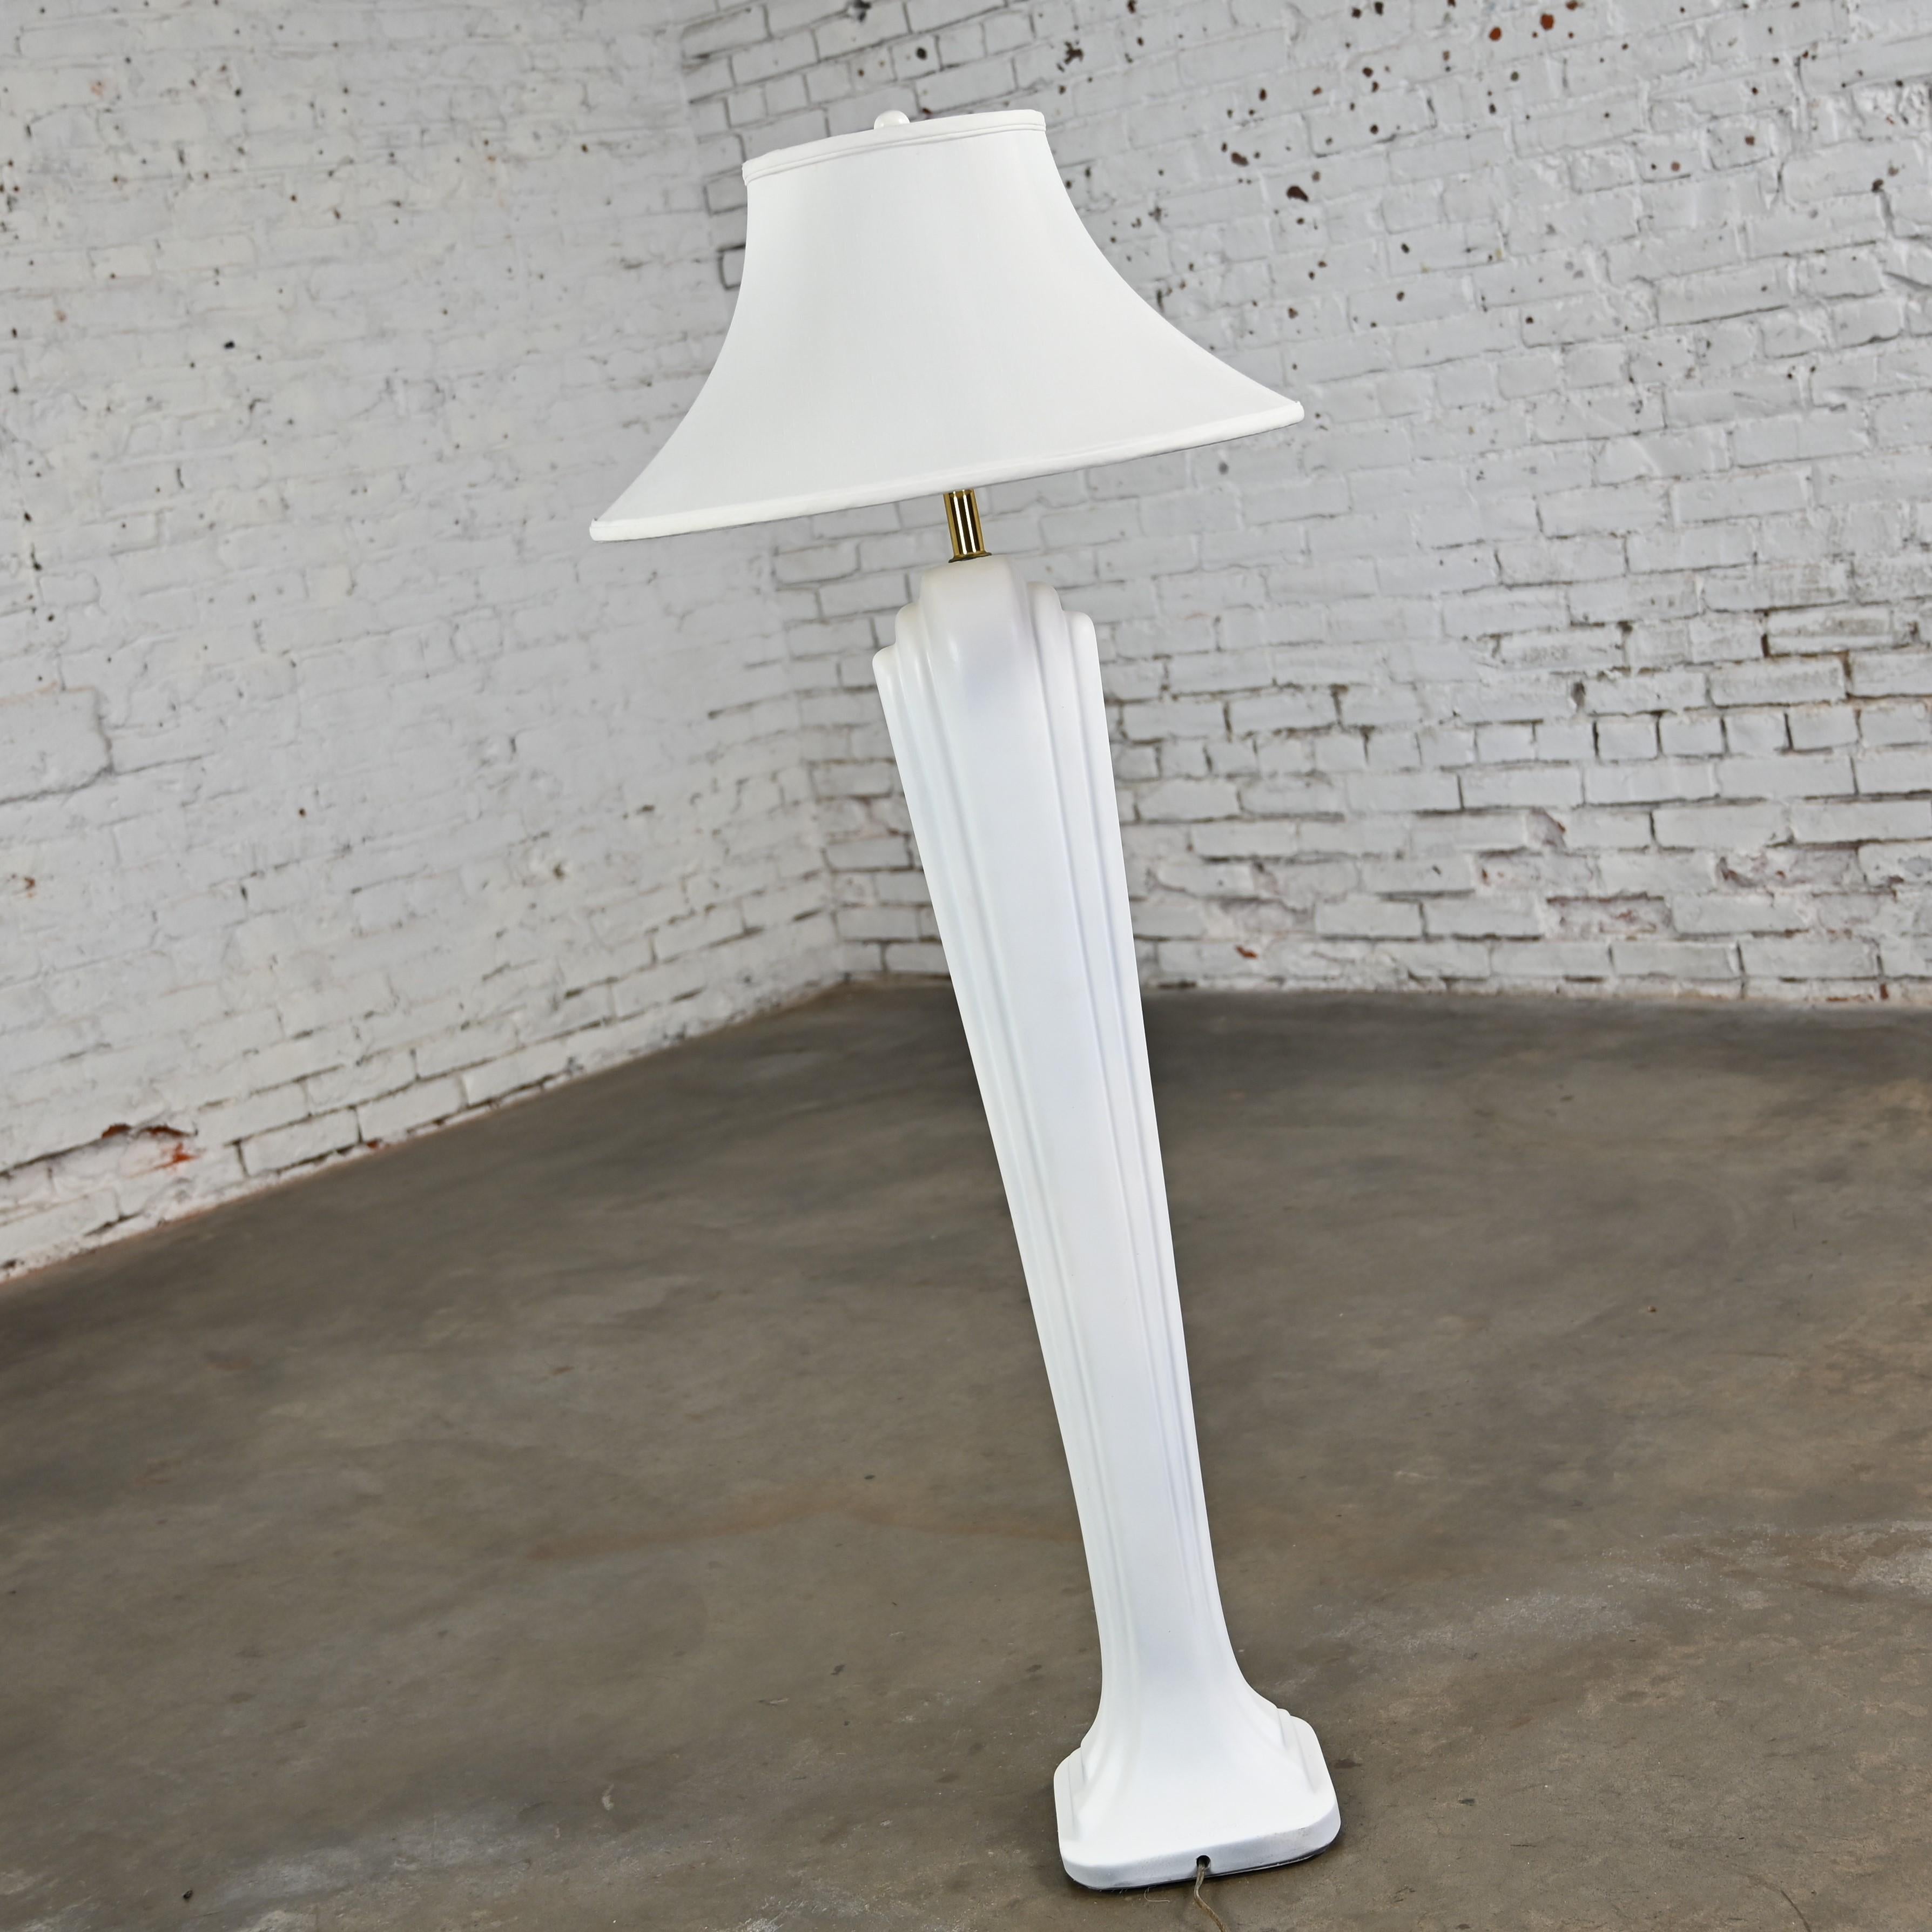 Late 20th Century Art Deco Revival to Postmodern Paolo Gucci Floor Lamp White Sculpted Resin  For Sale